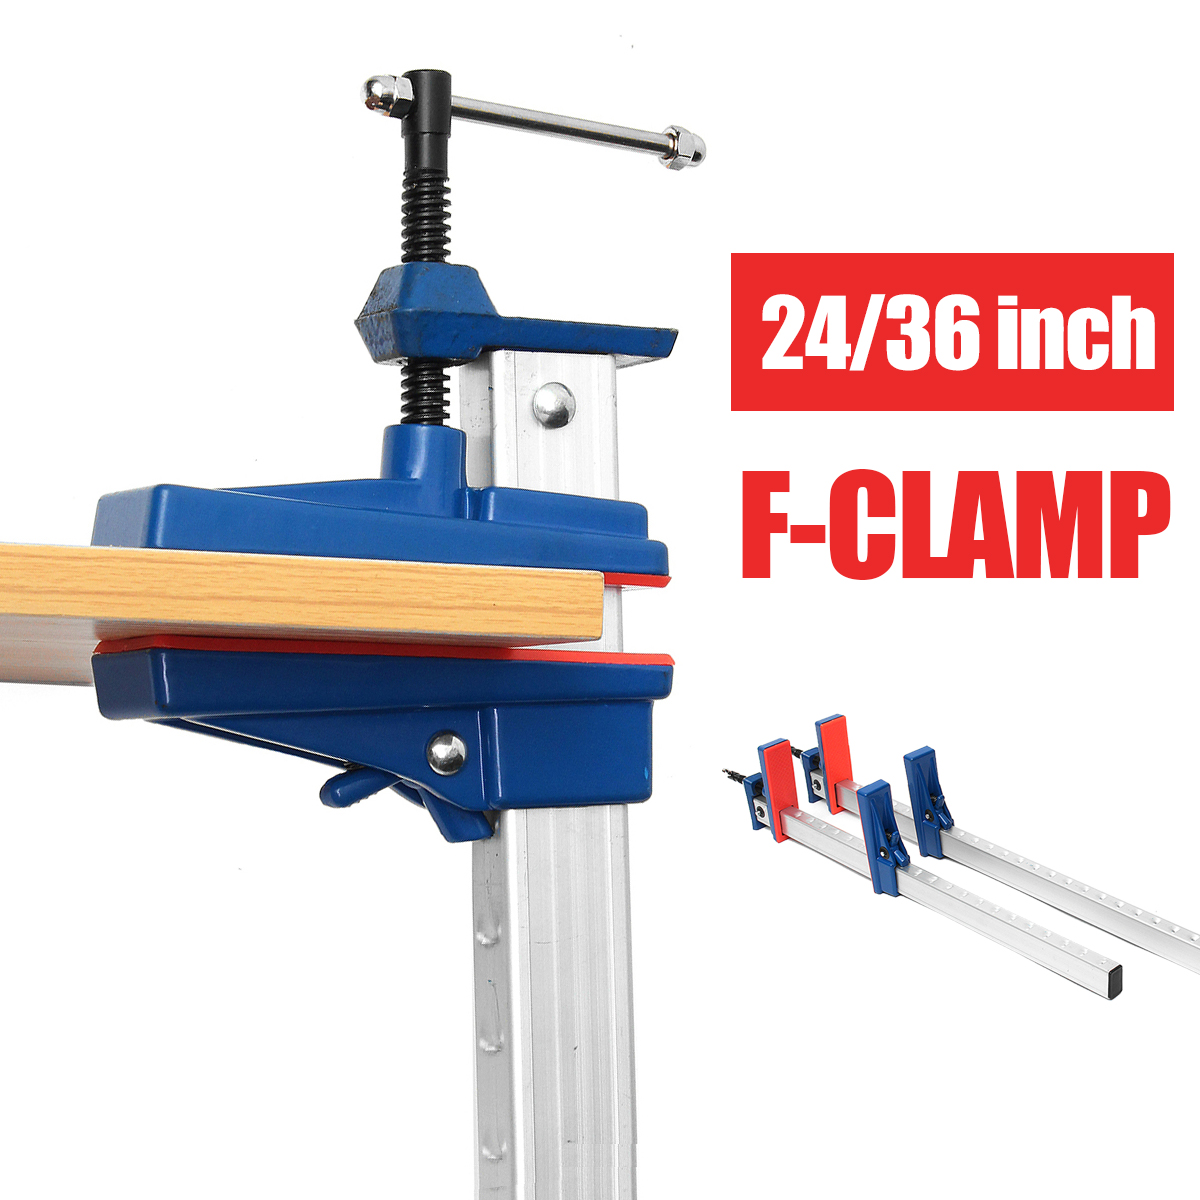 24/36 Inch Aluminum F-Clamp Bar Heavy Duty Holder Grip Release Parallel Adjustable Woodworking Tool 43